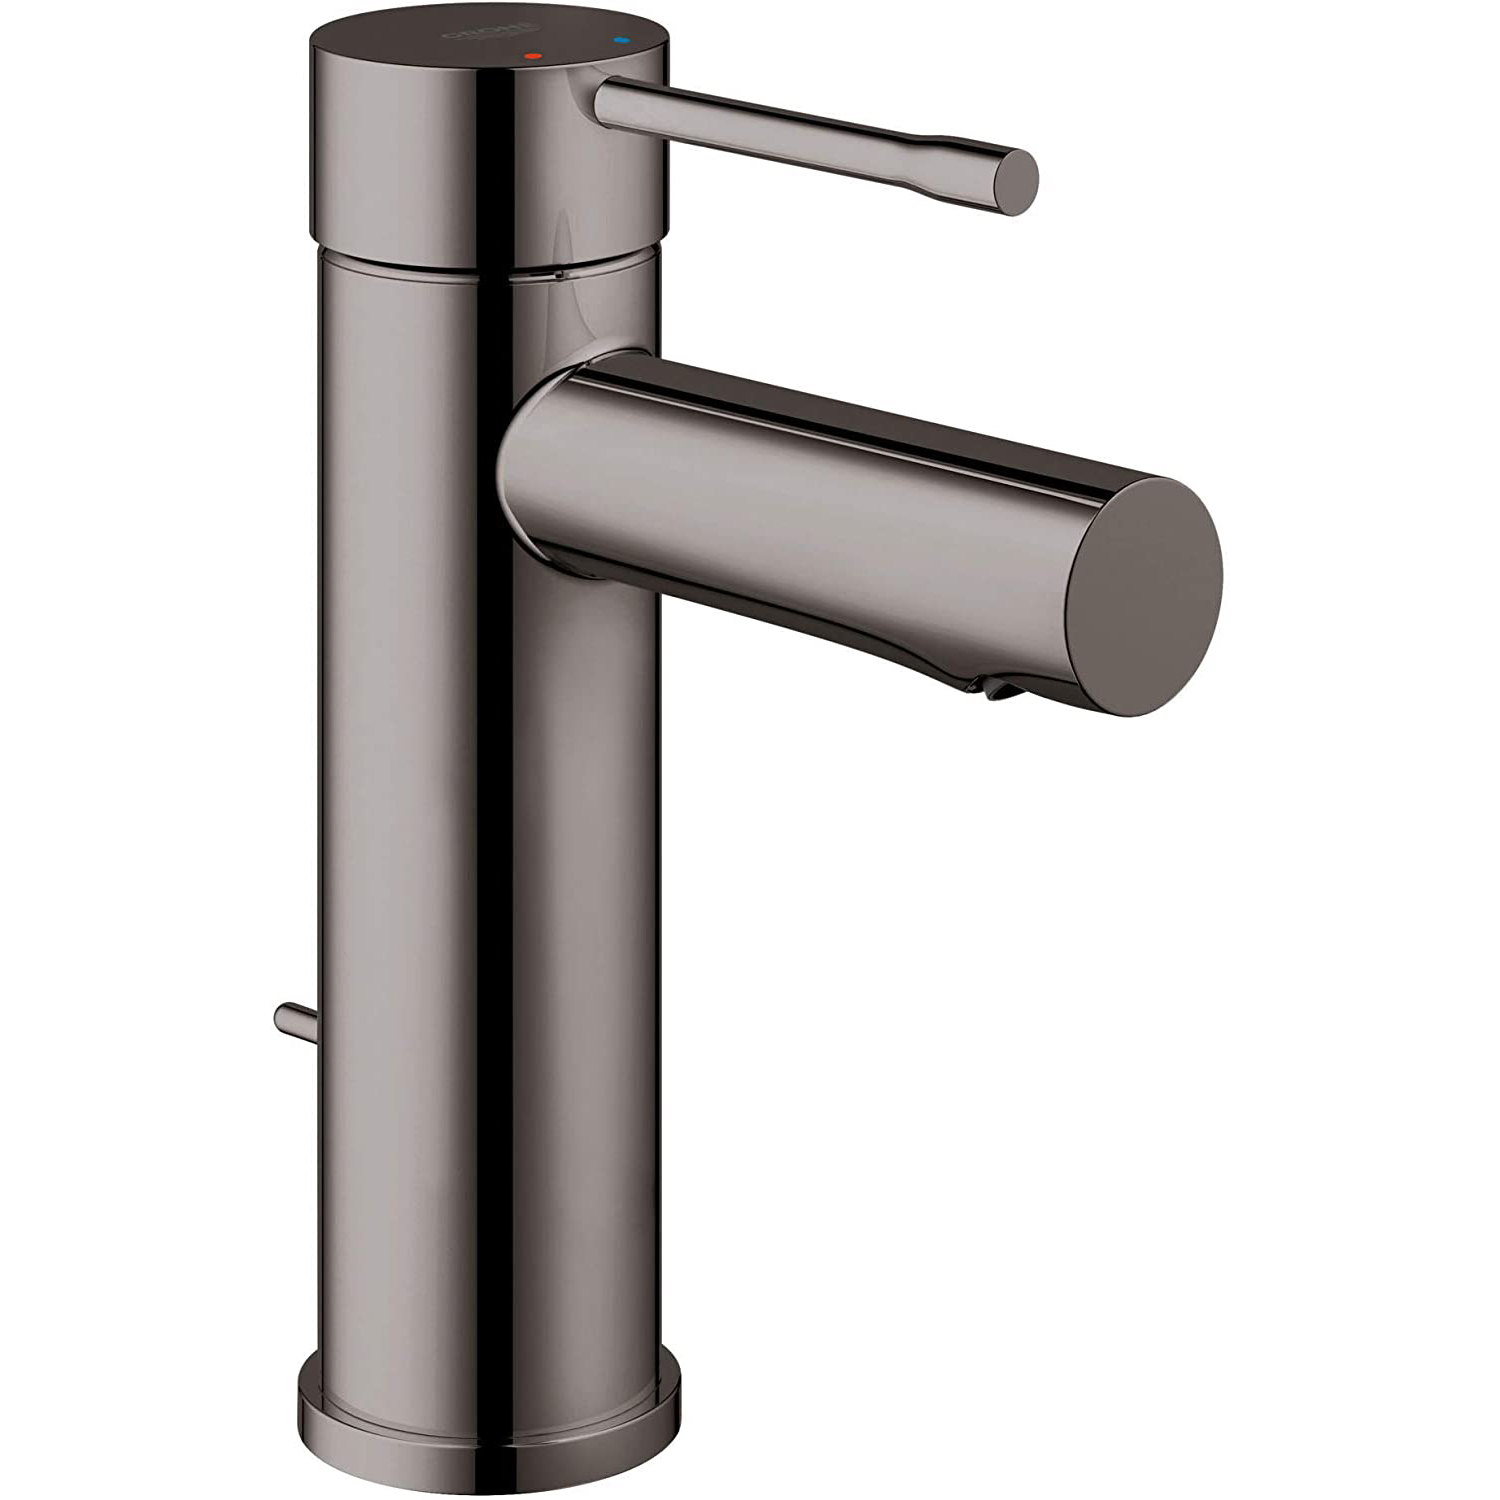 Essence 1-Hole S-Size Lav Faucet w/Drain in Hard Graphite, 1.2 gpm